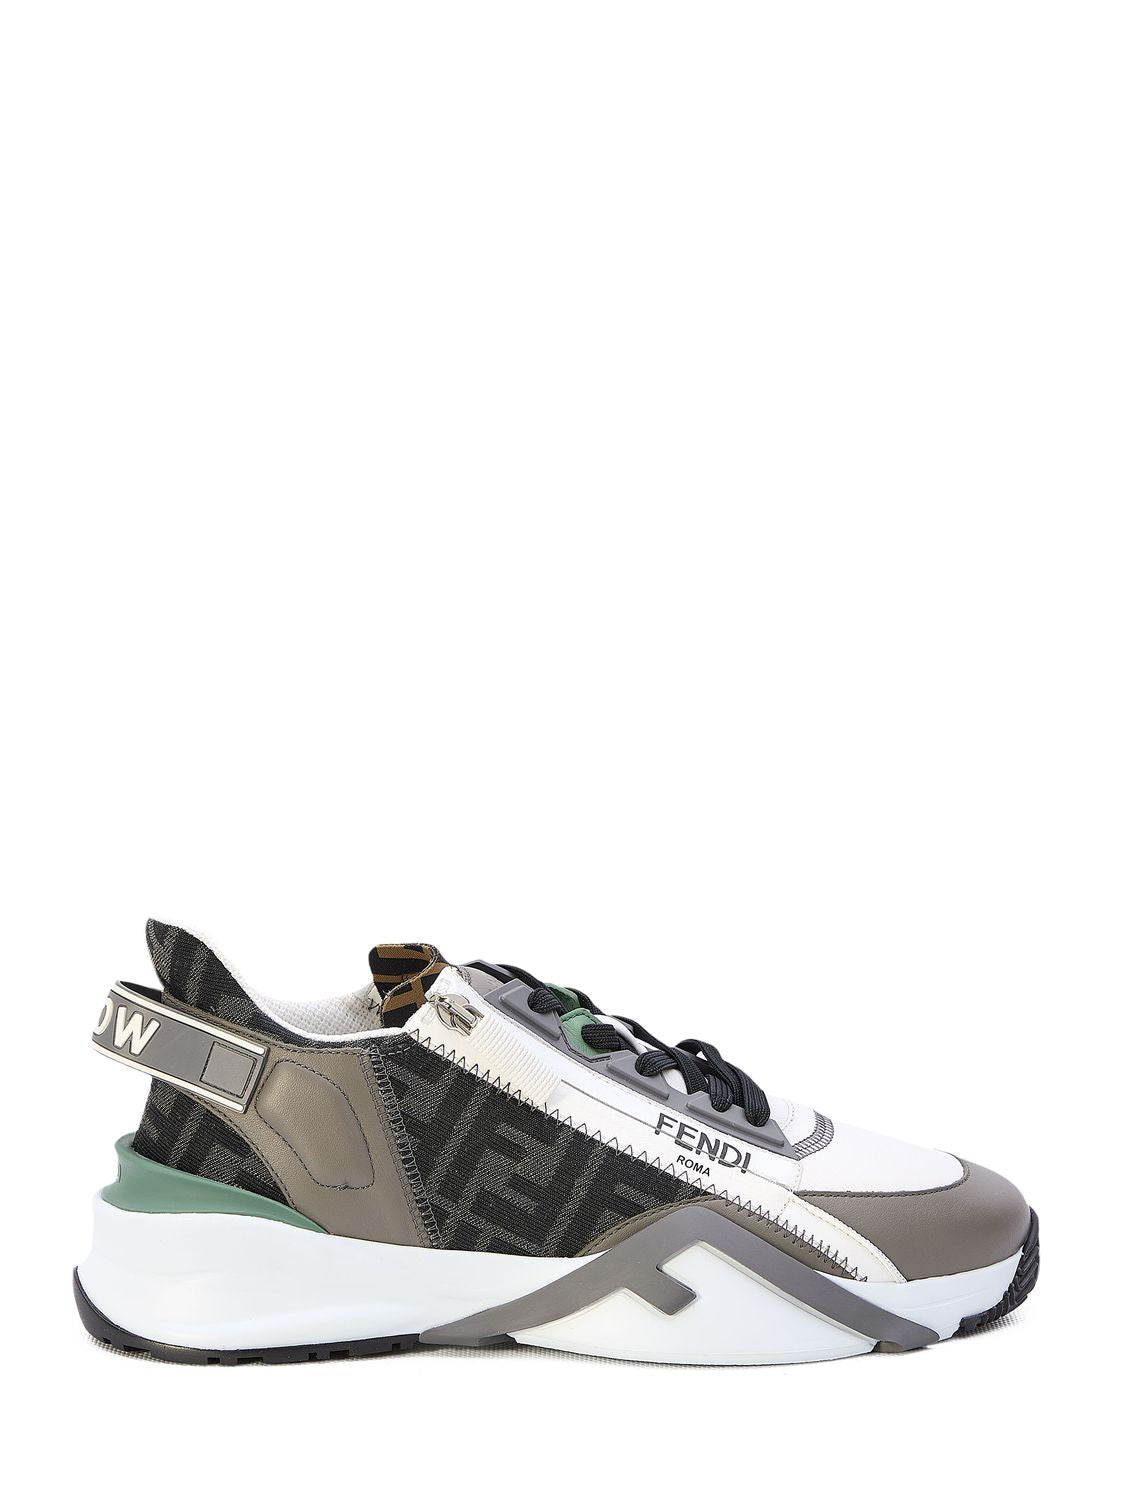 White and Grey Leather Fendi Flow Sneakers for Men